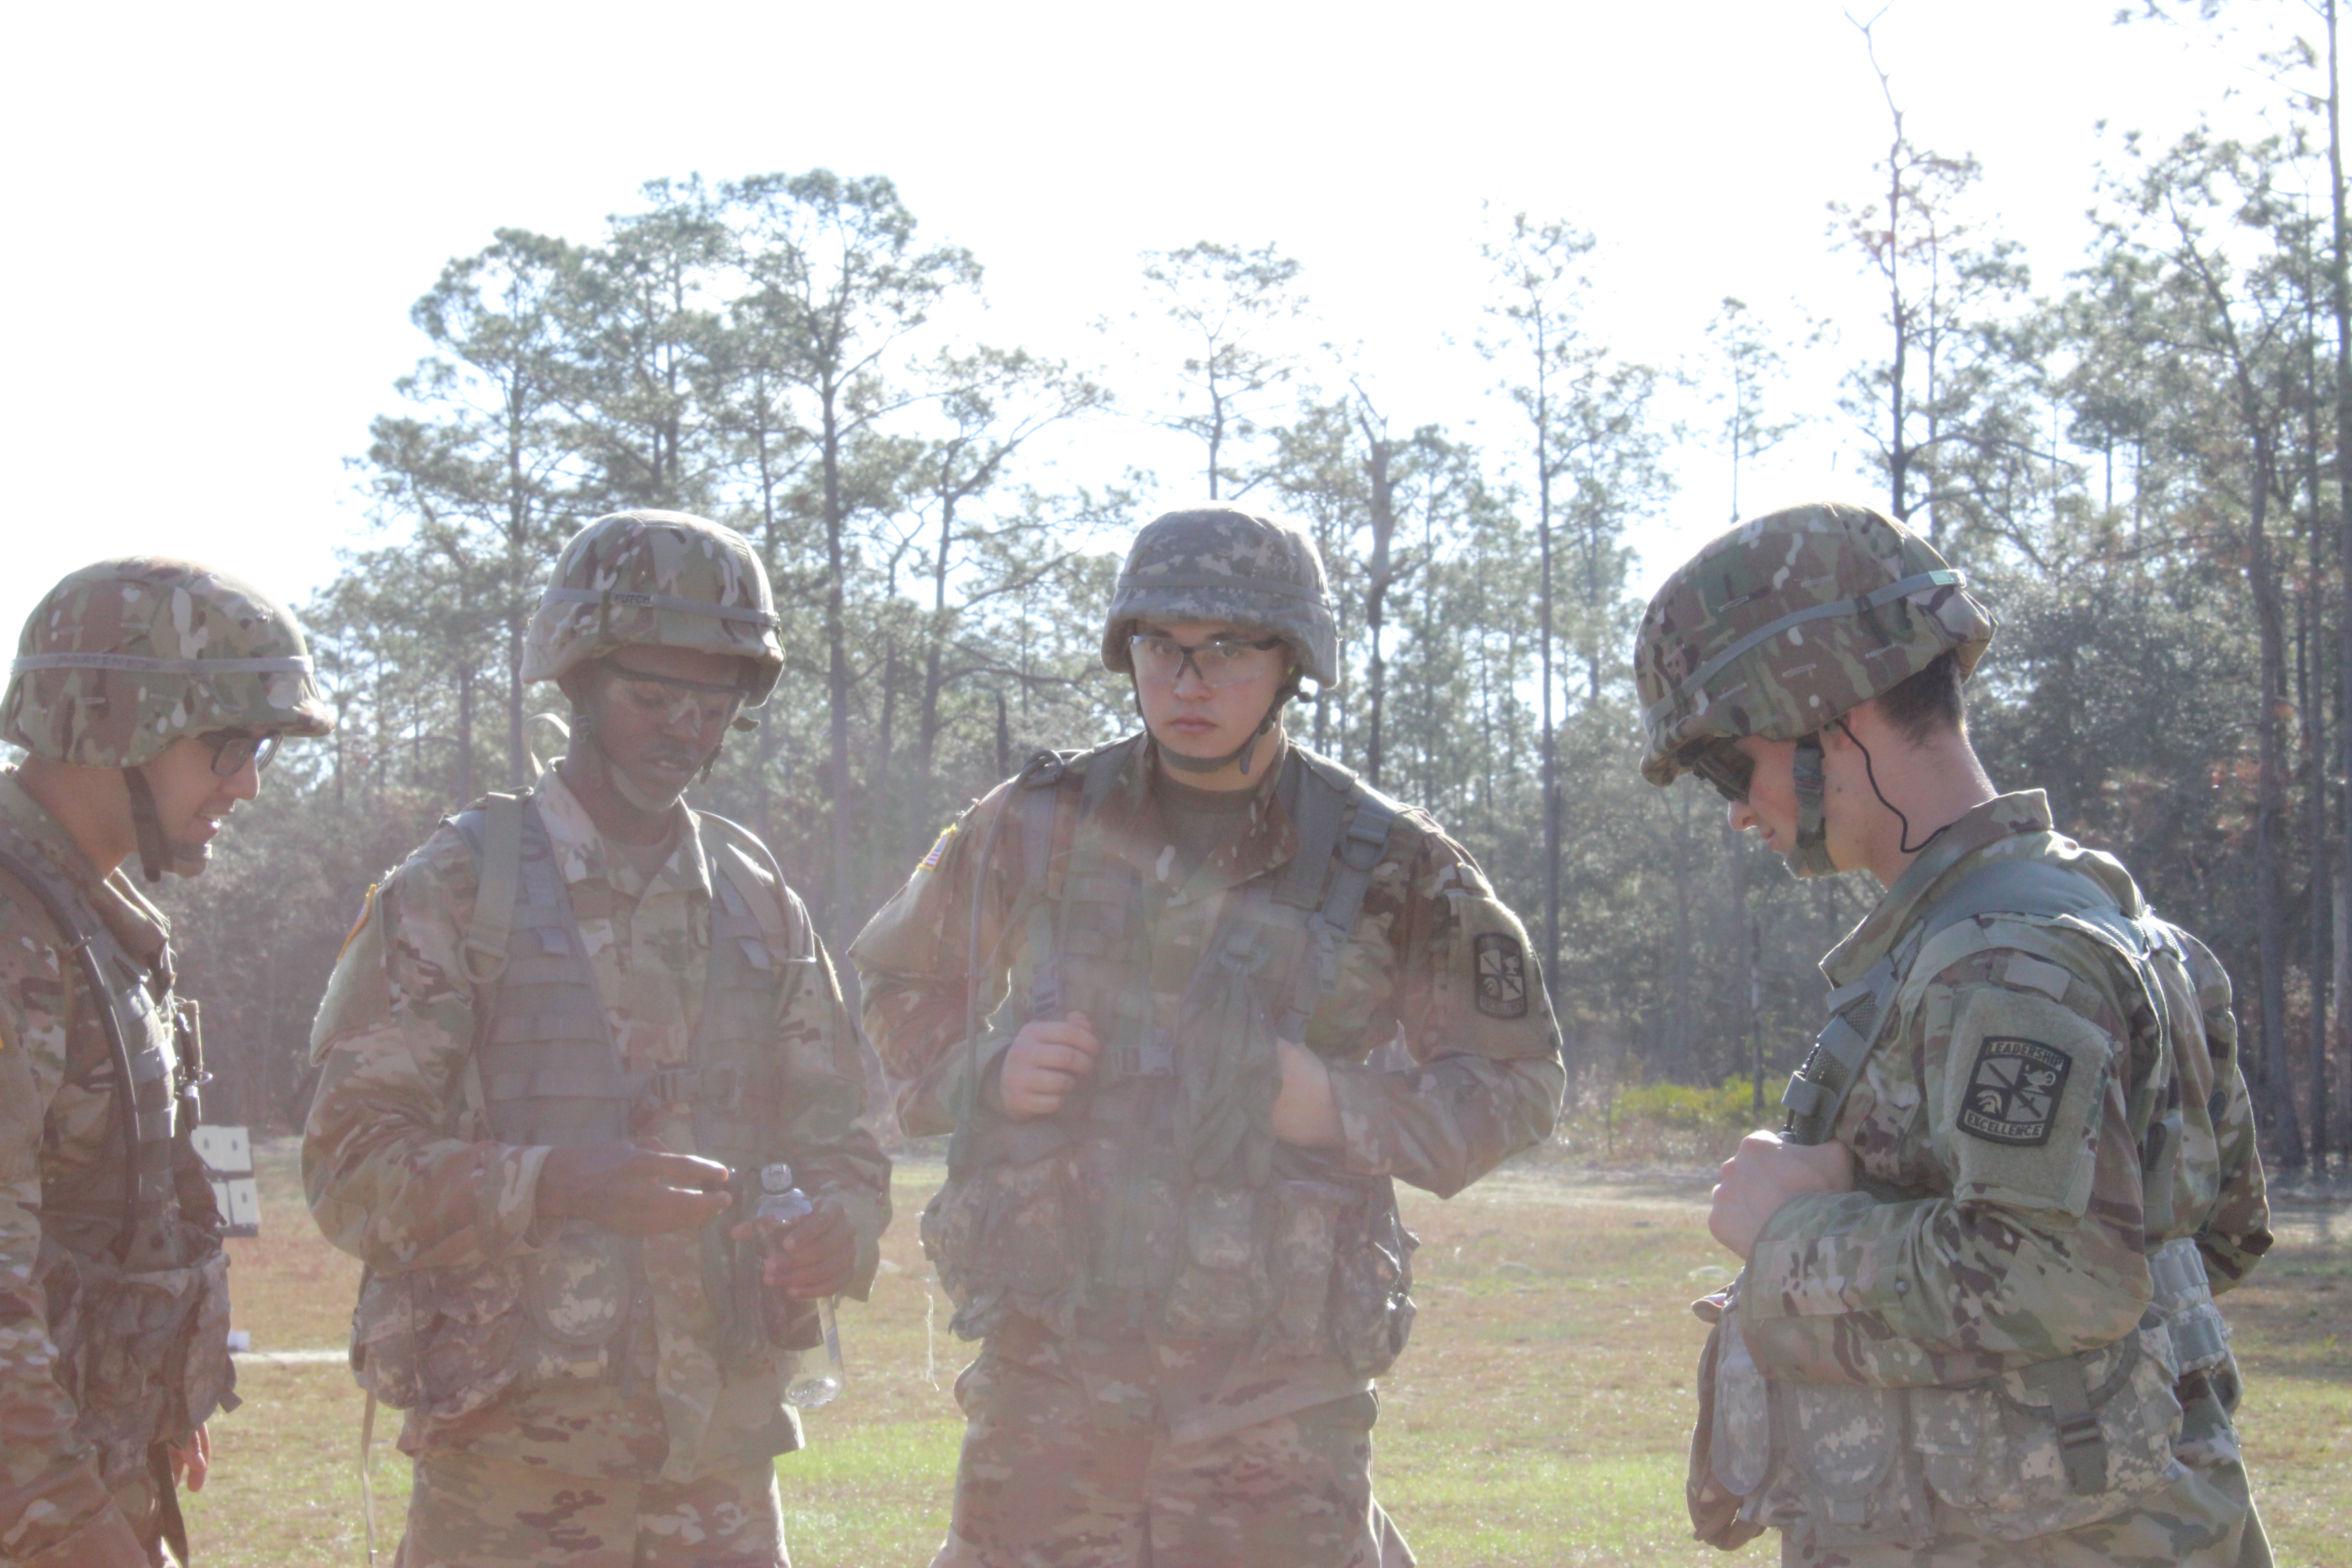 ROTC program implements cadet involvement and leadership